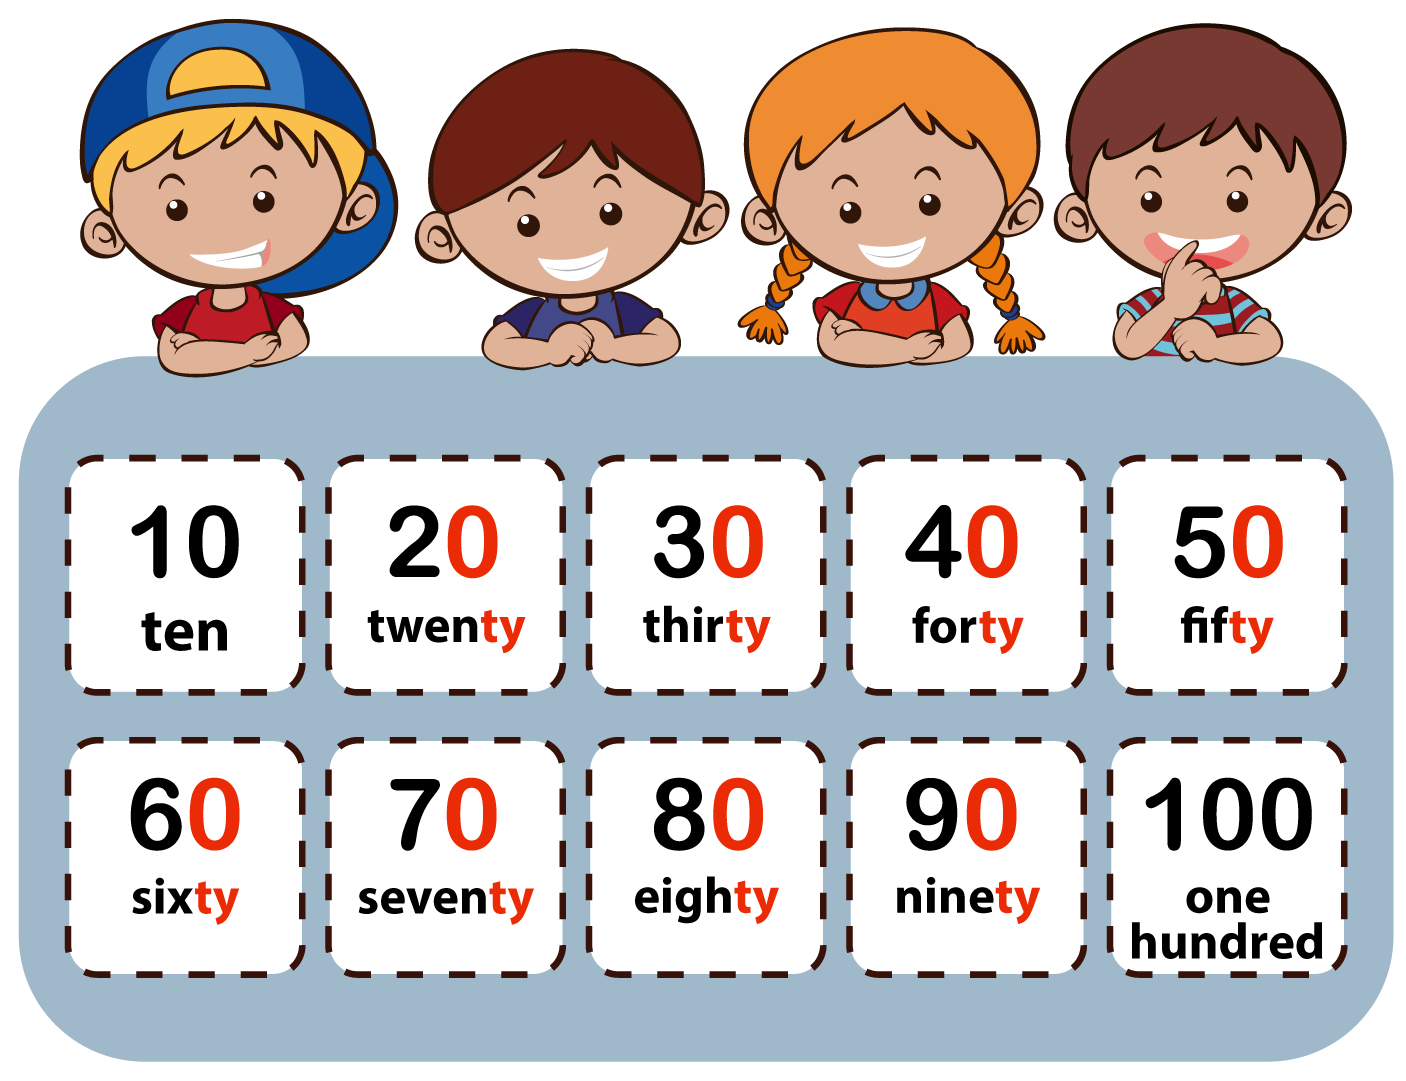 maths-digits-up-to-100-level-1-activity-for-kids-primaryleap-co-uk